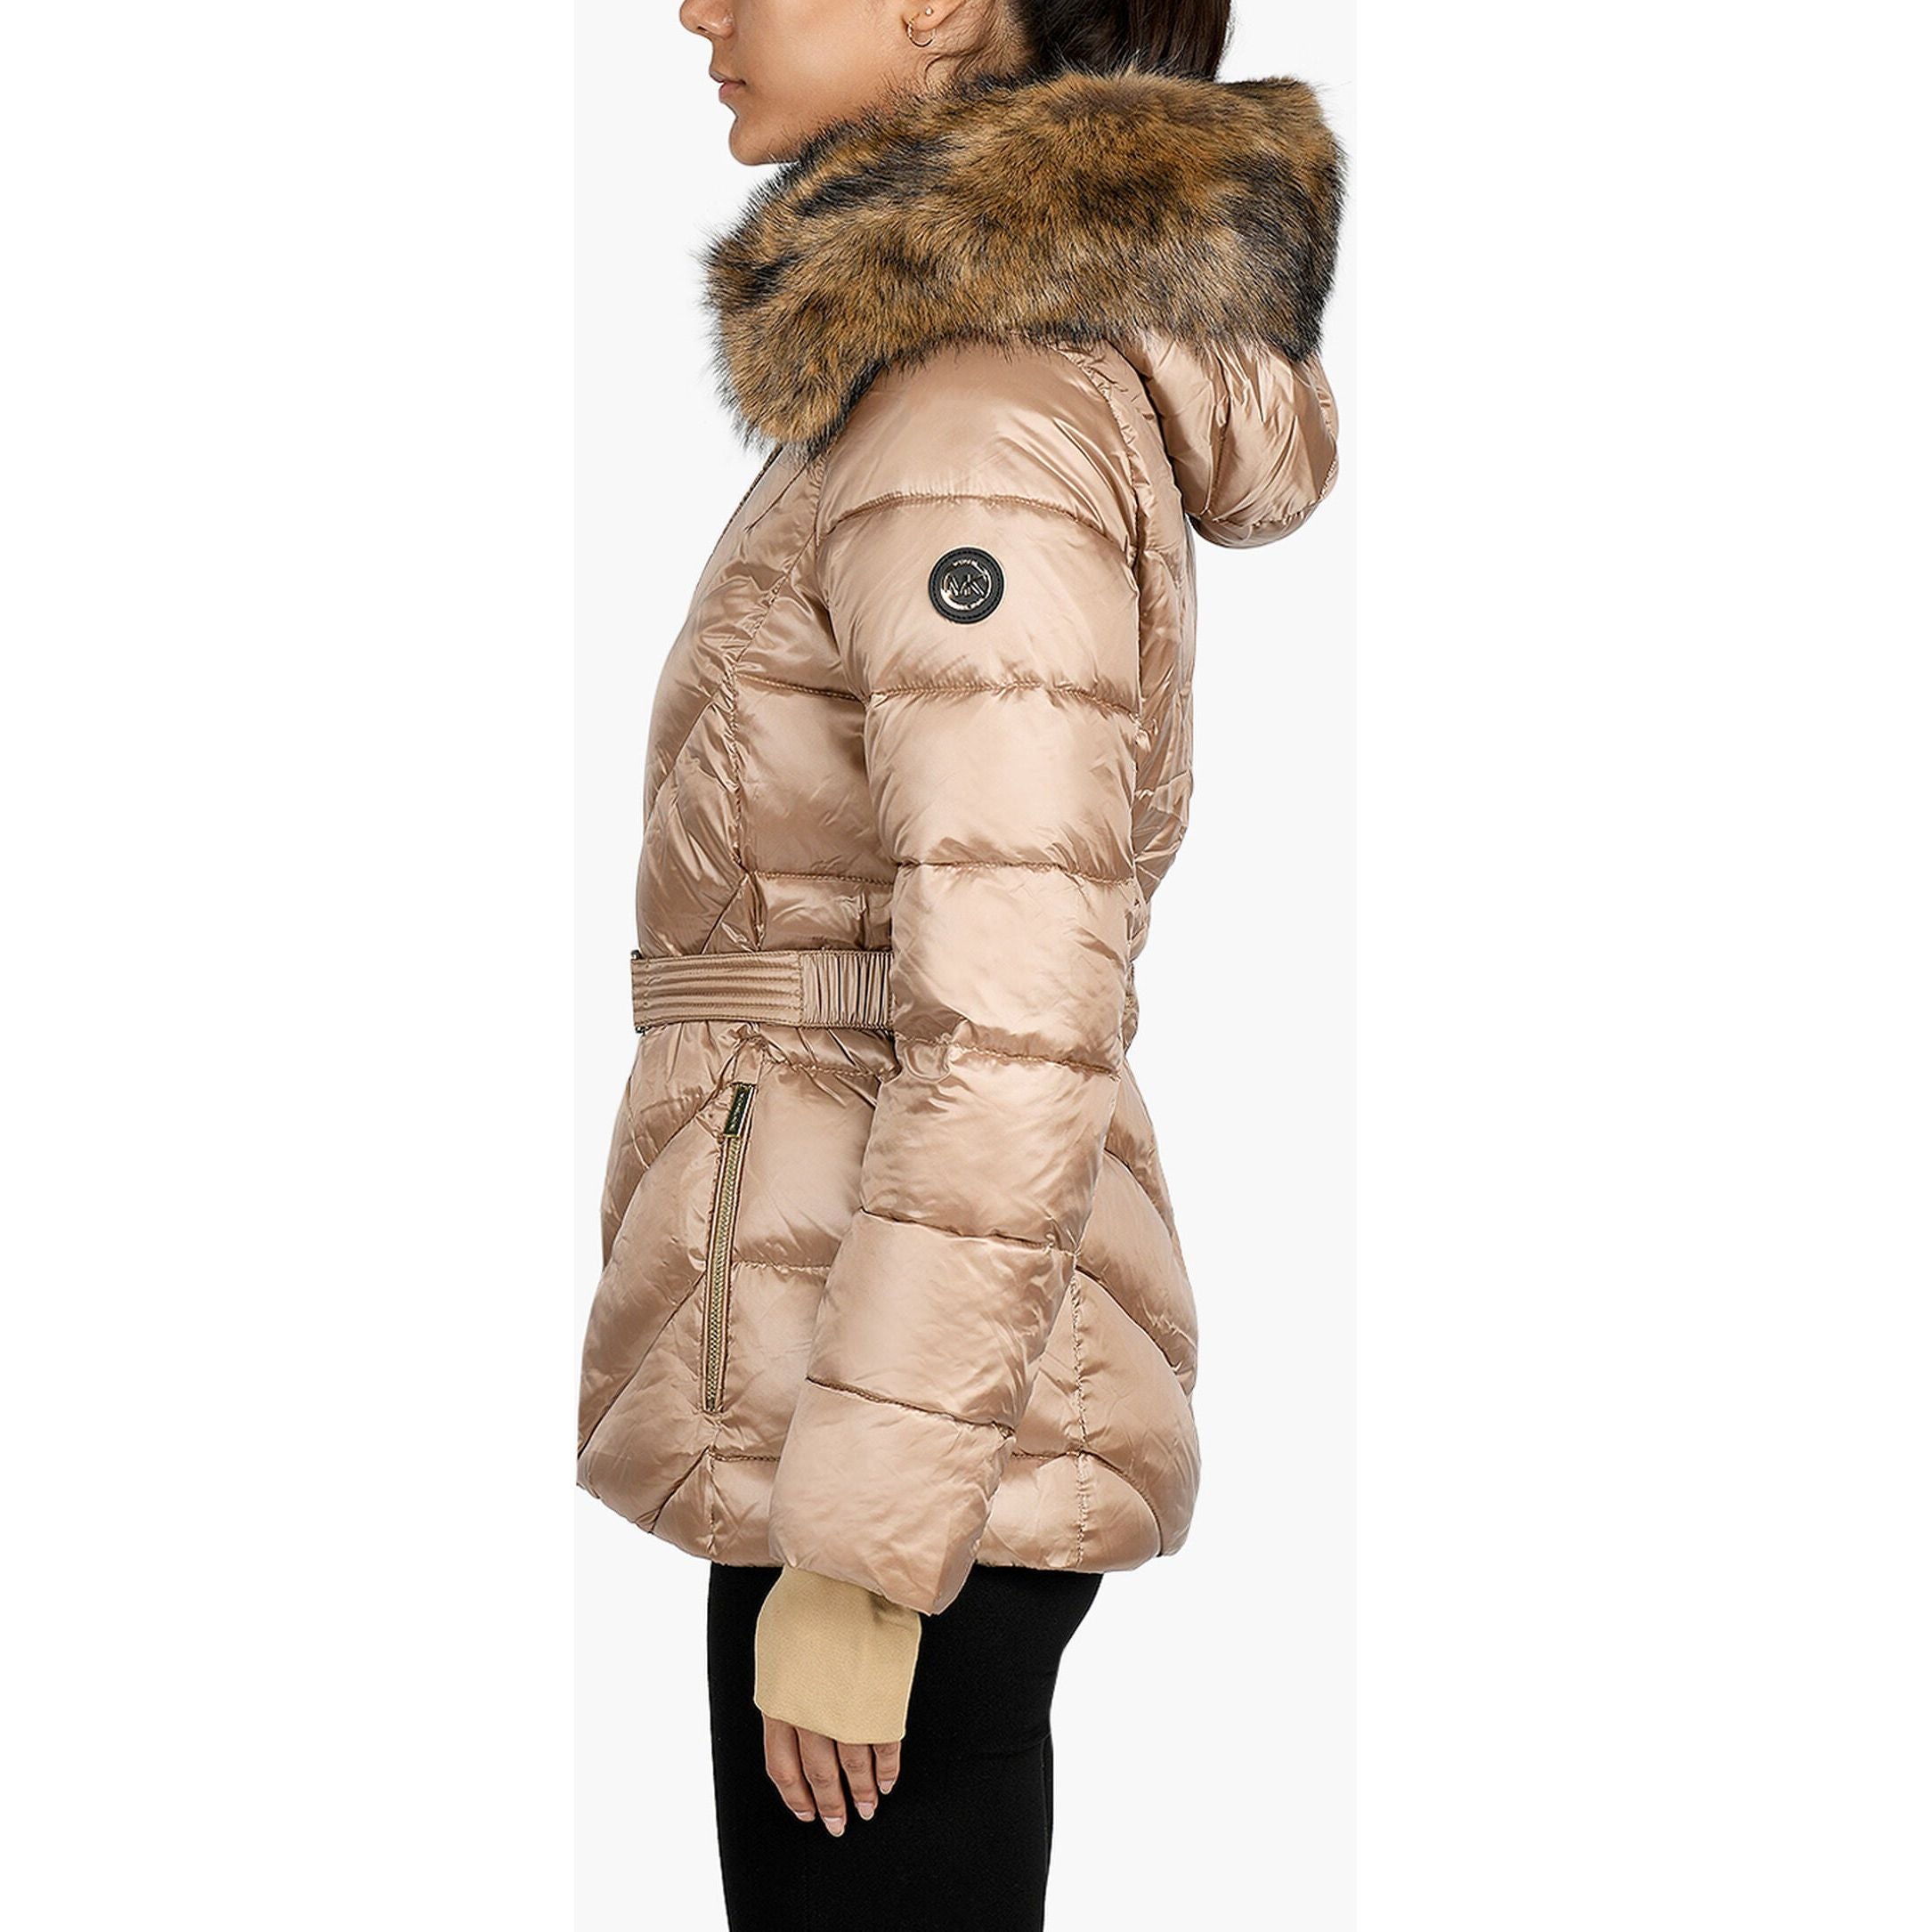 Micheal Kors - Belted Puffer in Gold